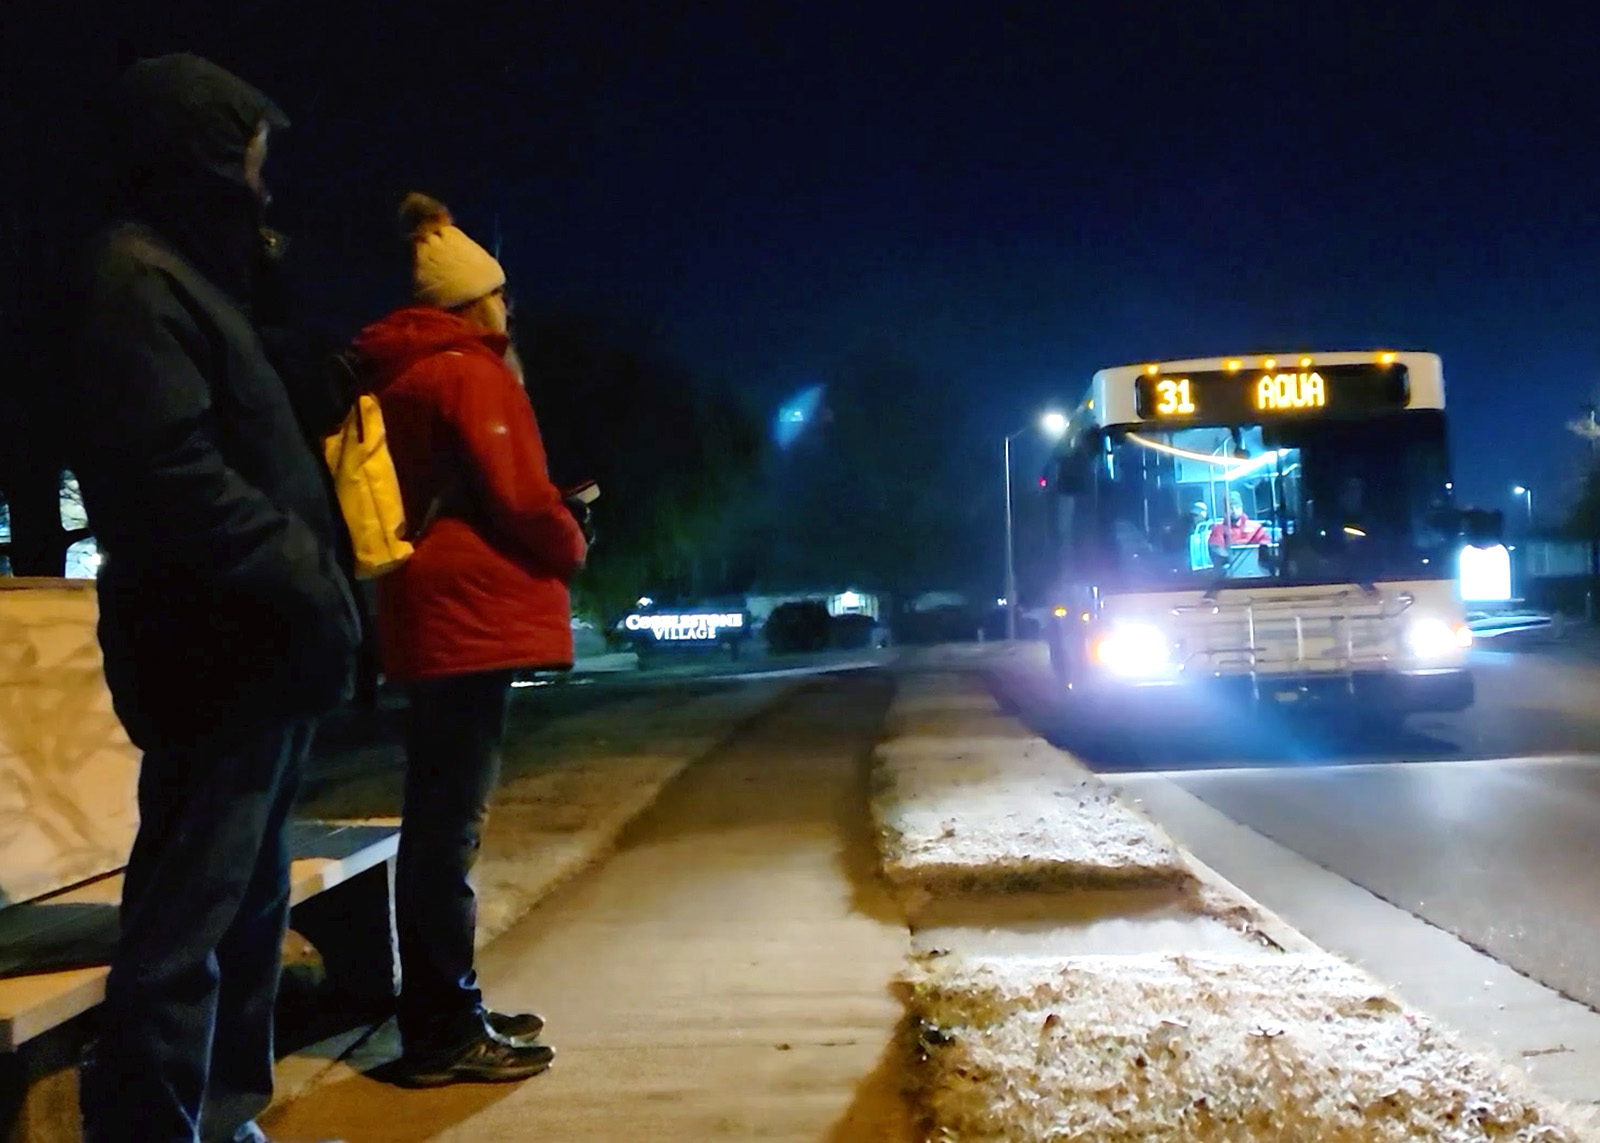 Blue Line, Orange Line and lifeline: Springfield bus service functions for those of meager means